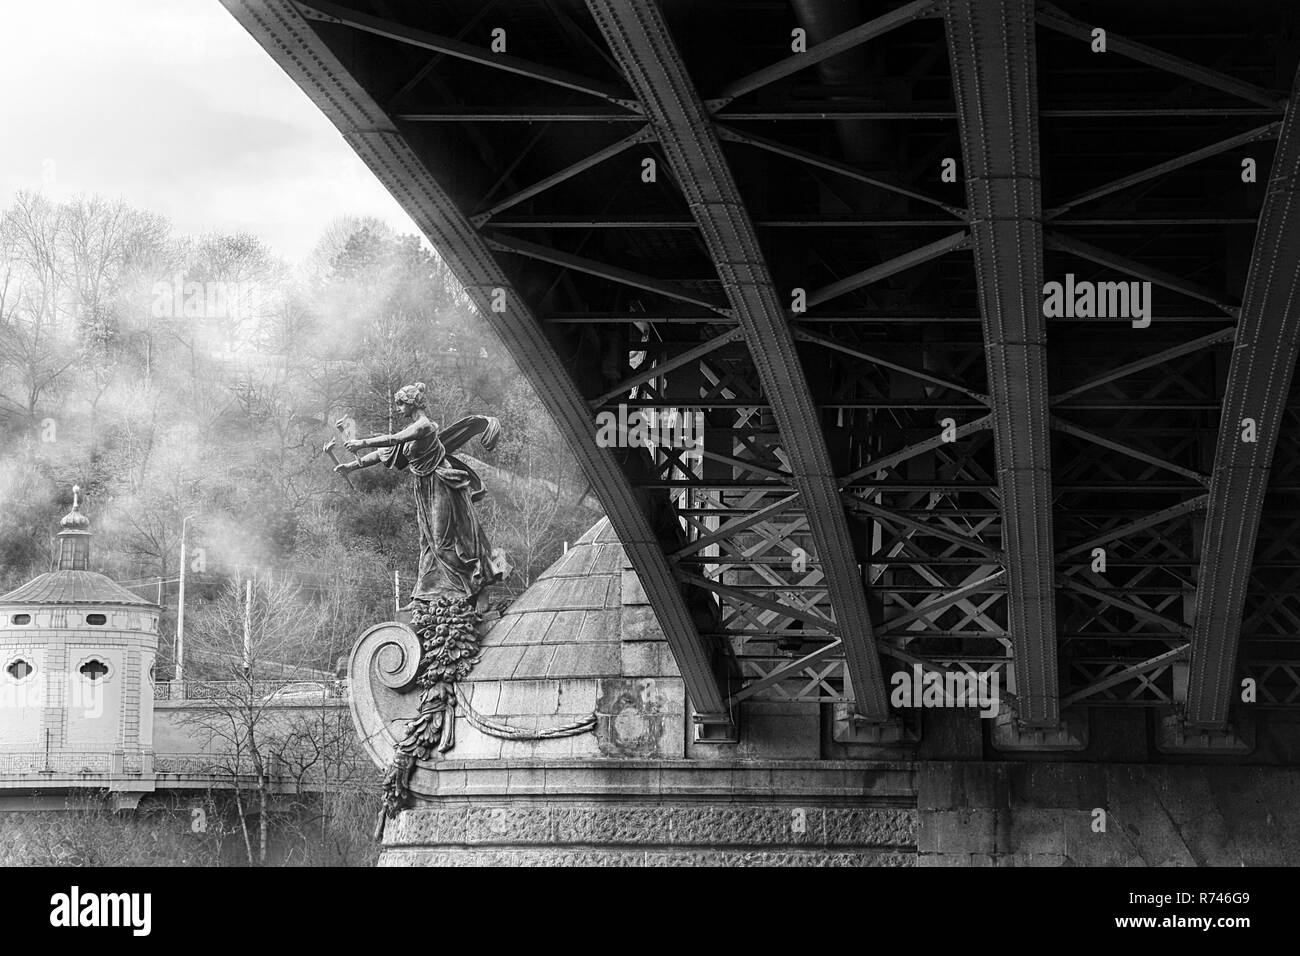 Foggy morning under the iron structure of a modern bridge, and a statue of a winged woman holding torches installed on the pillar. Black and white. Stock Photo